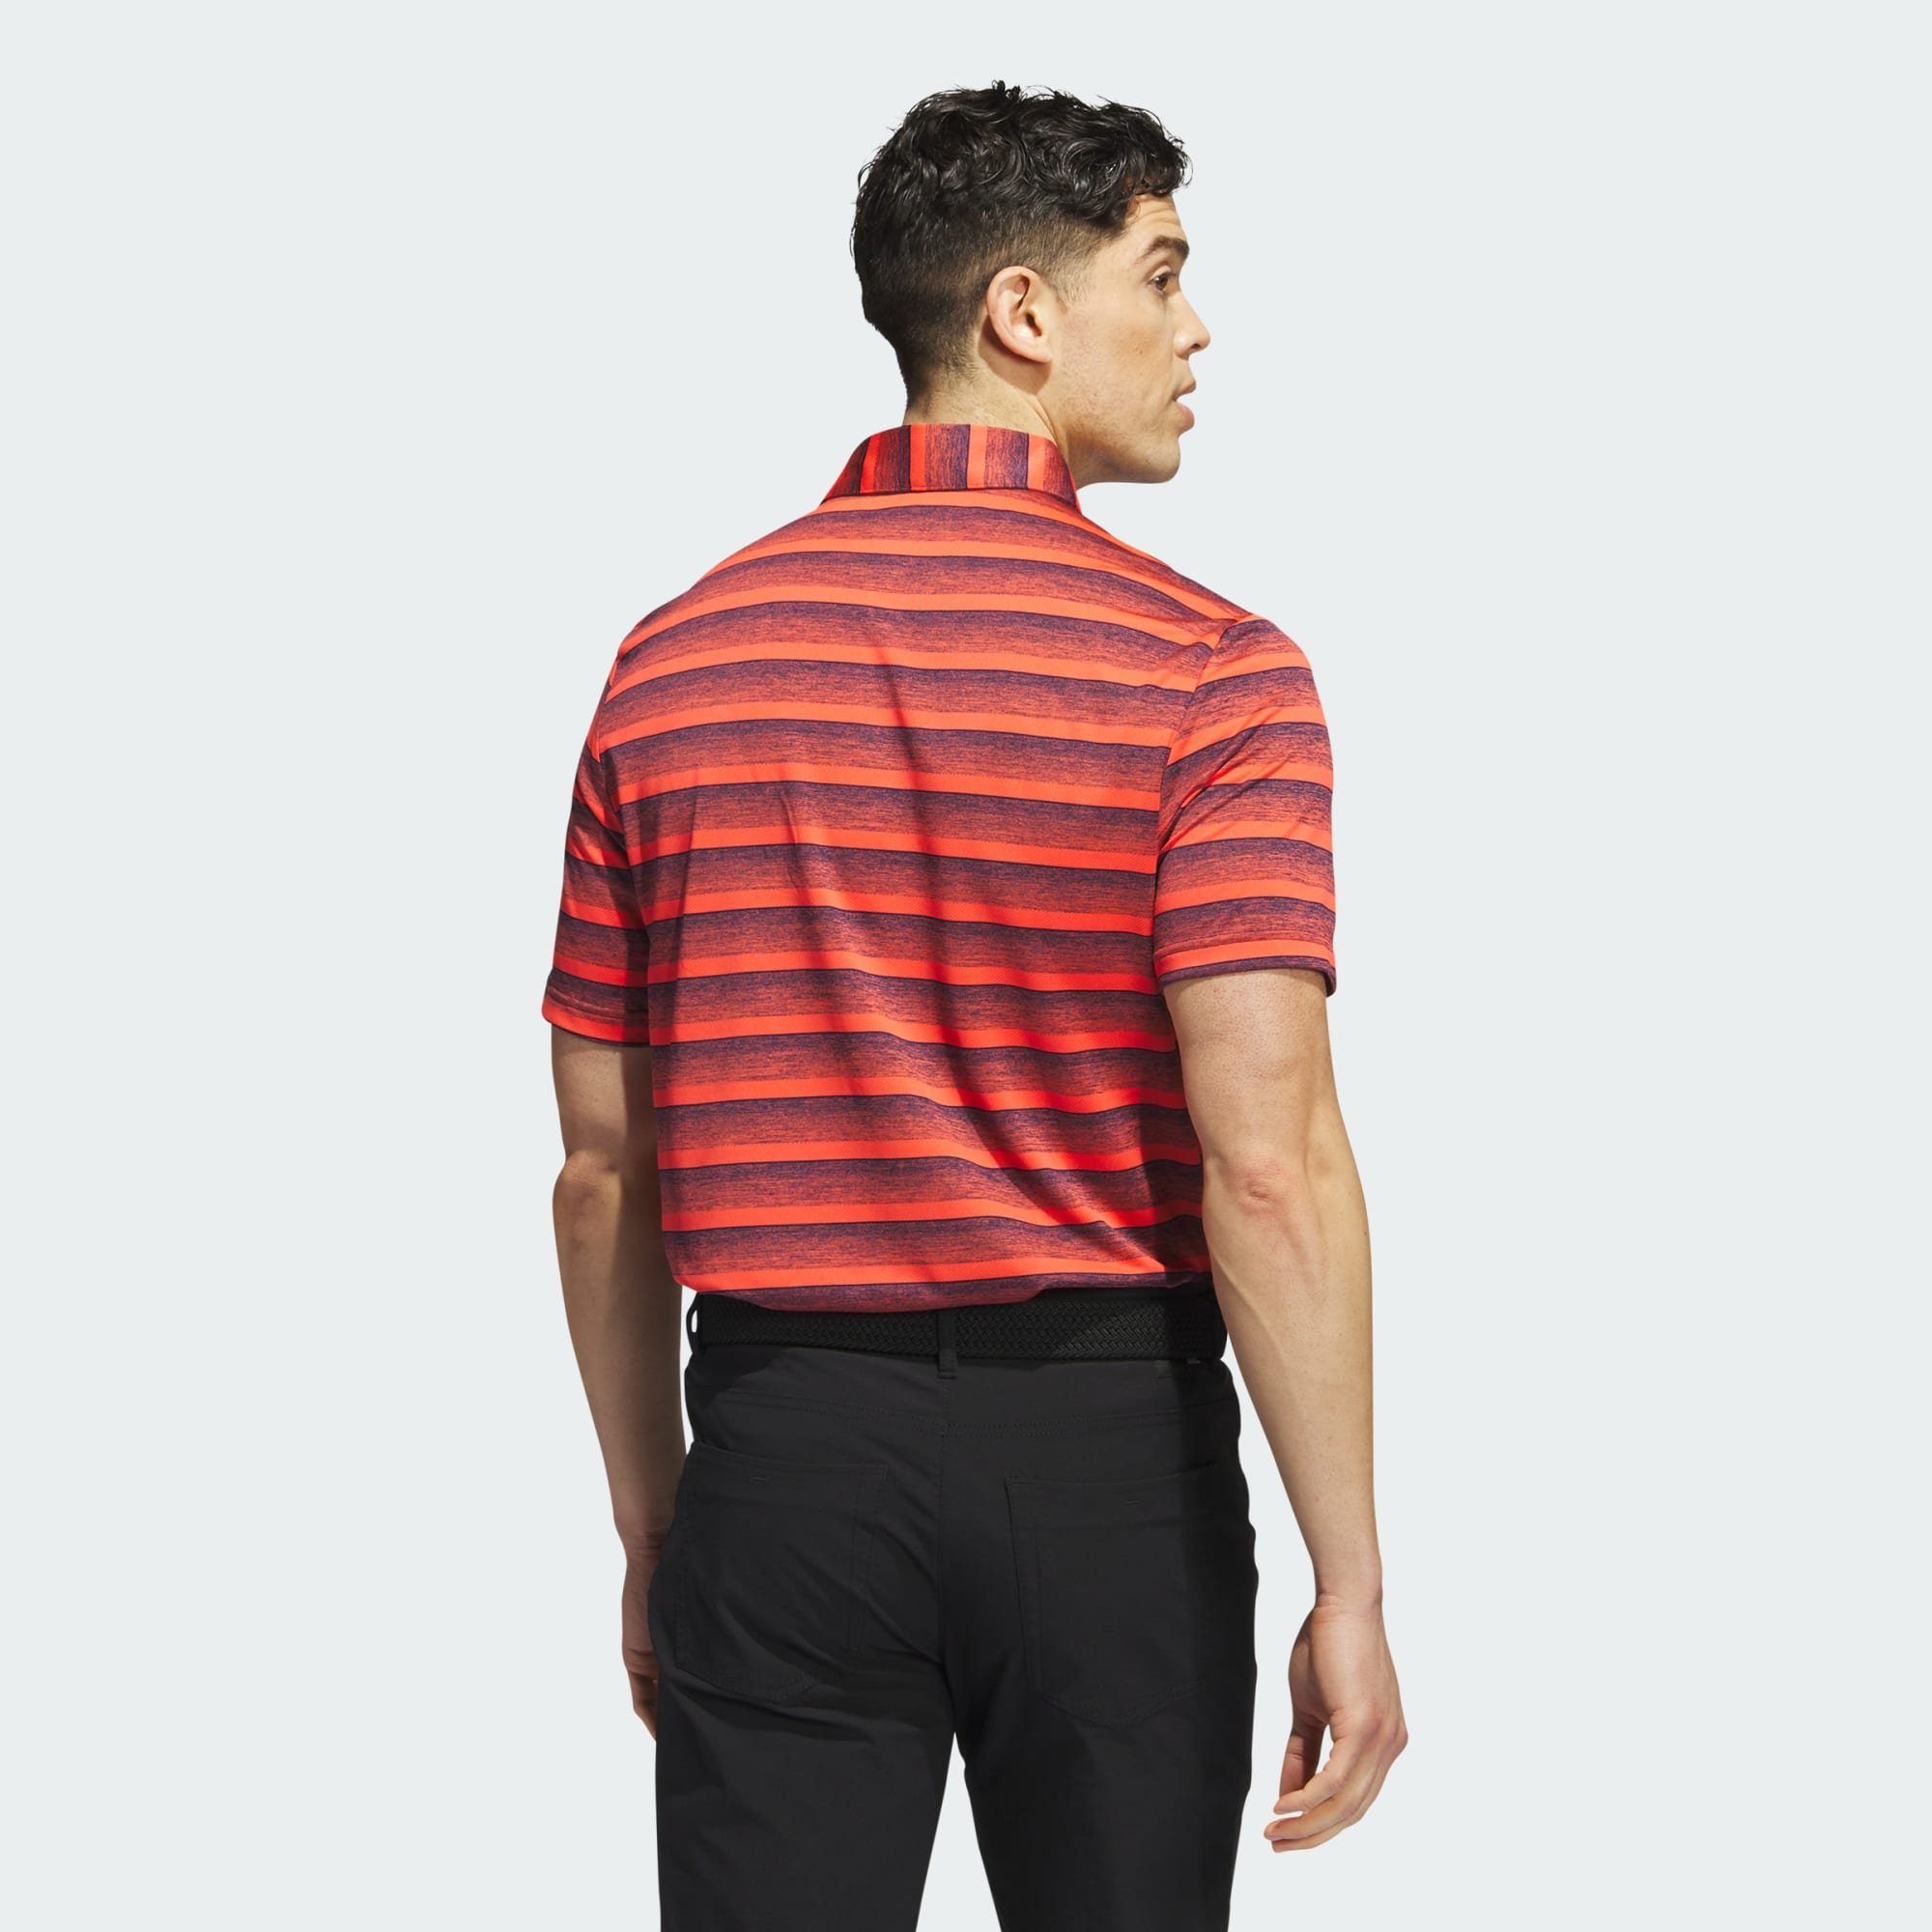 adidas Funktionsshirt Collegiate Bright Red POLOSHIRT Performance / STRIPE Navy TWO-COLOR